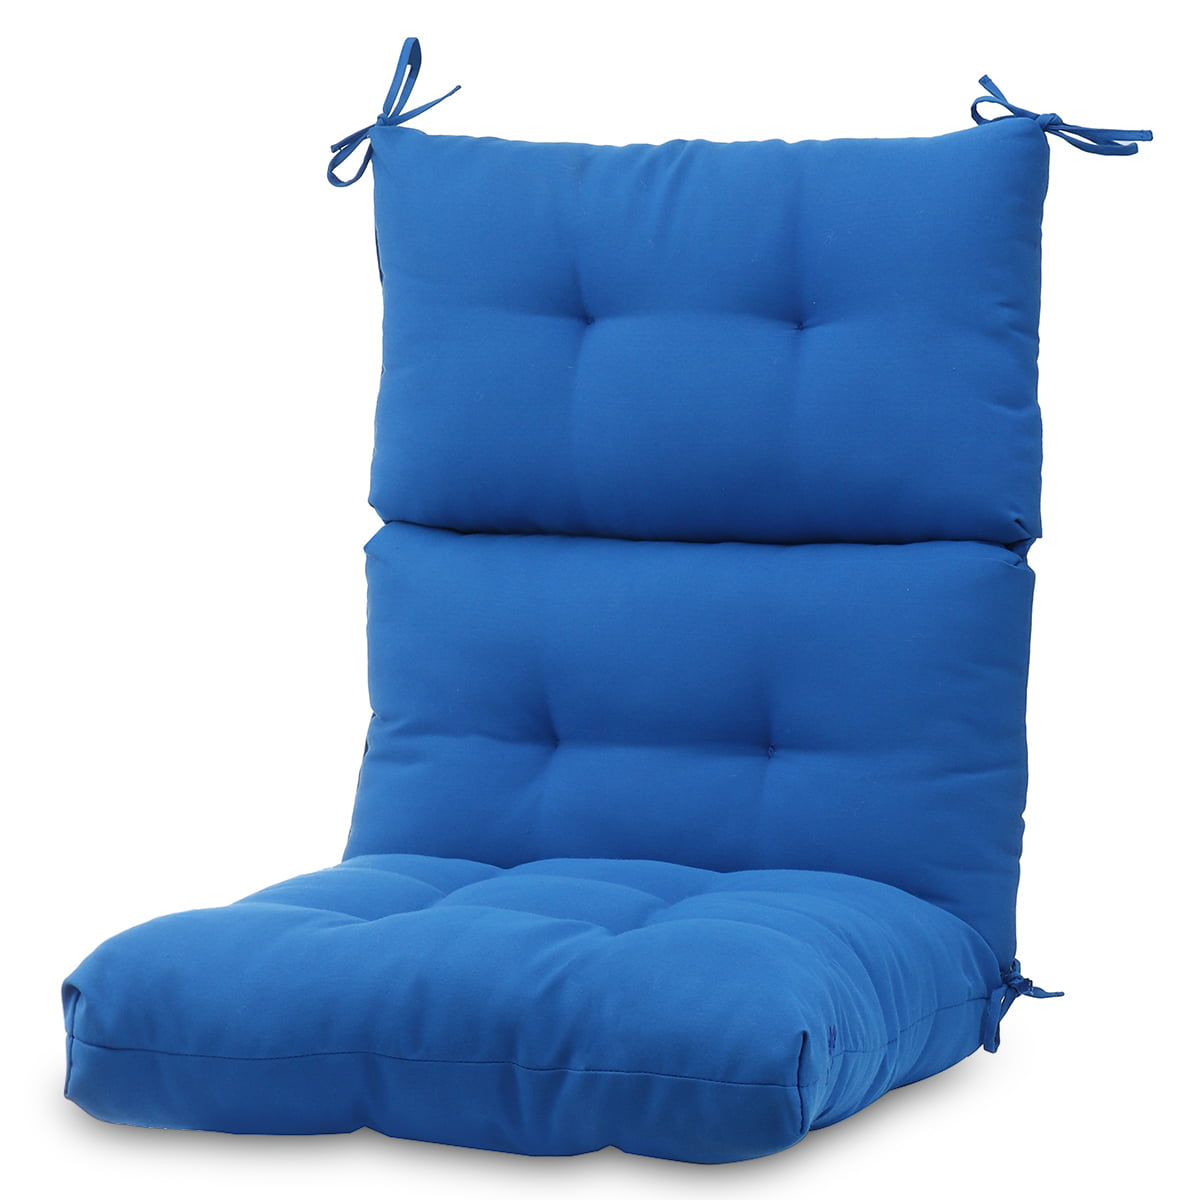 Details about   High Rebound Foam Outdoor High Back Chair Cushion Seat Mat Water Resistant 